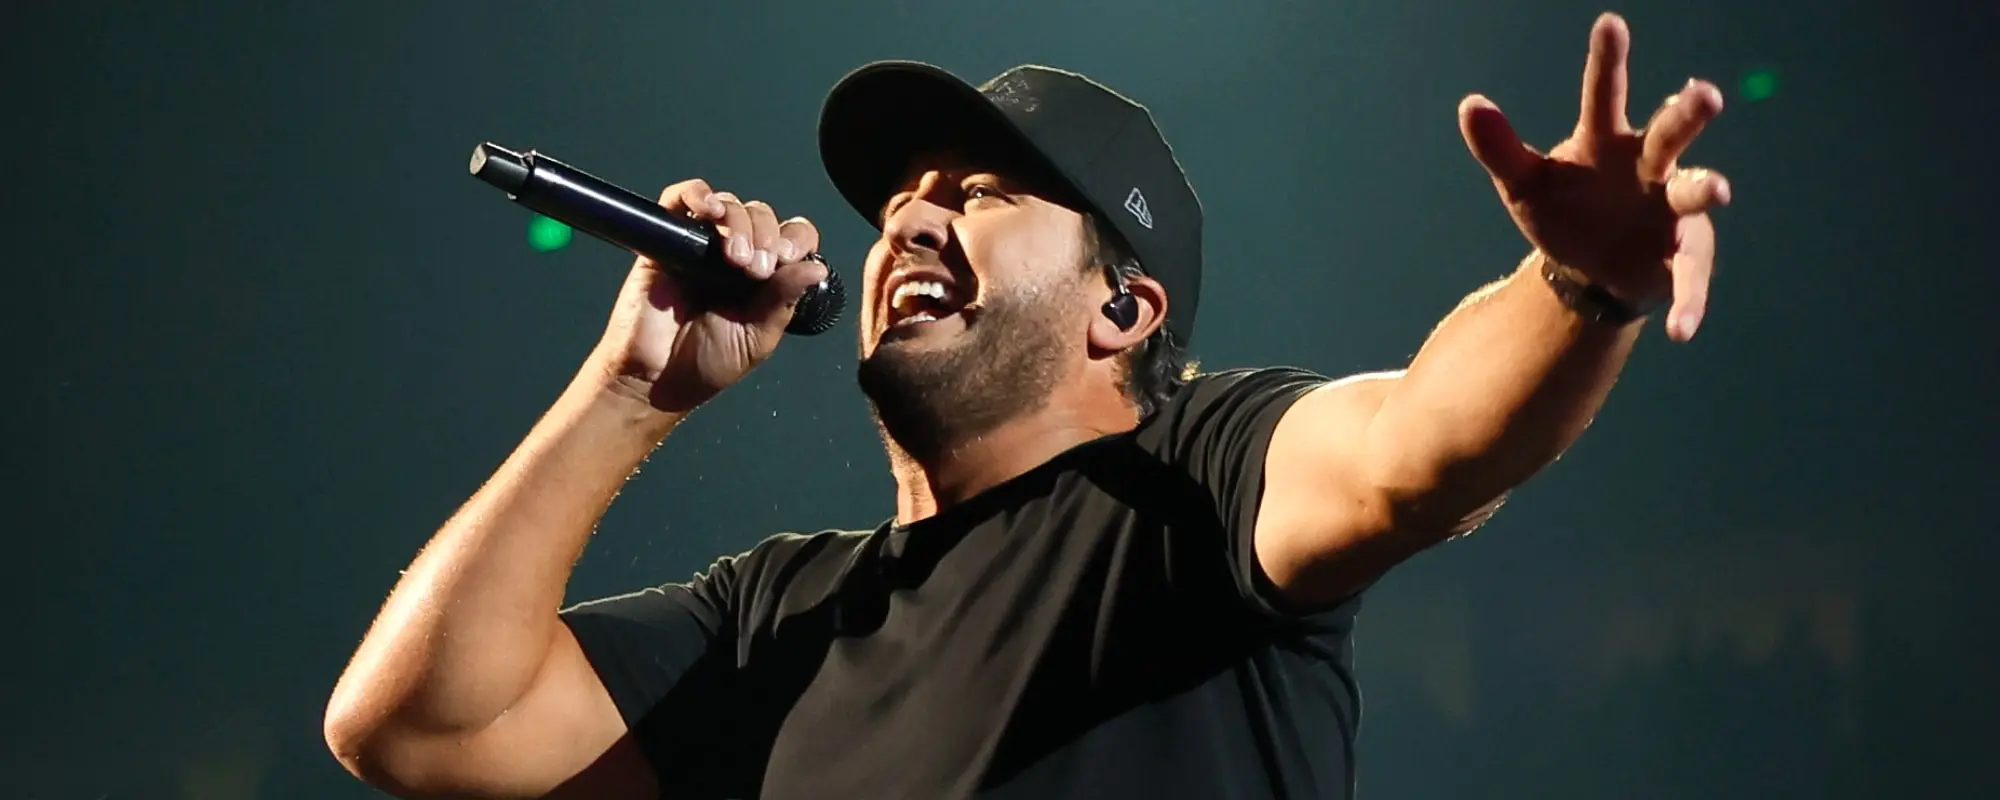 Luke Bryan Reveals His Plans for 2024: ‘American Idol,’ a New Tour, and More